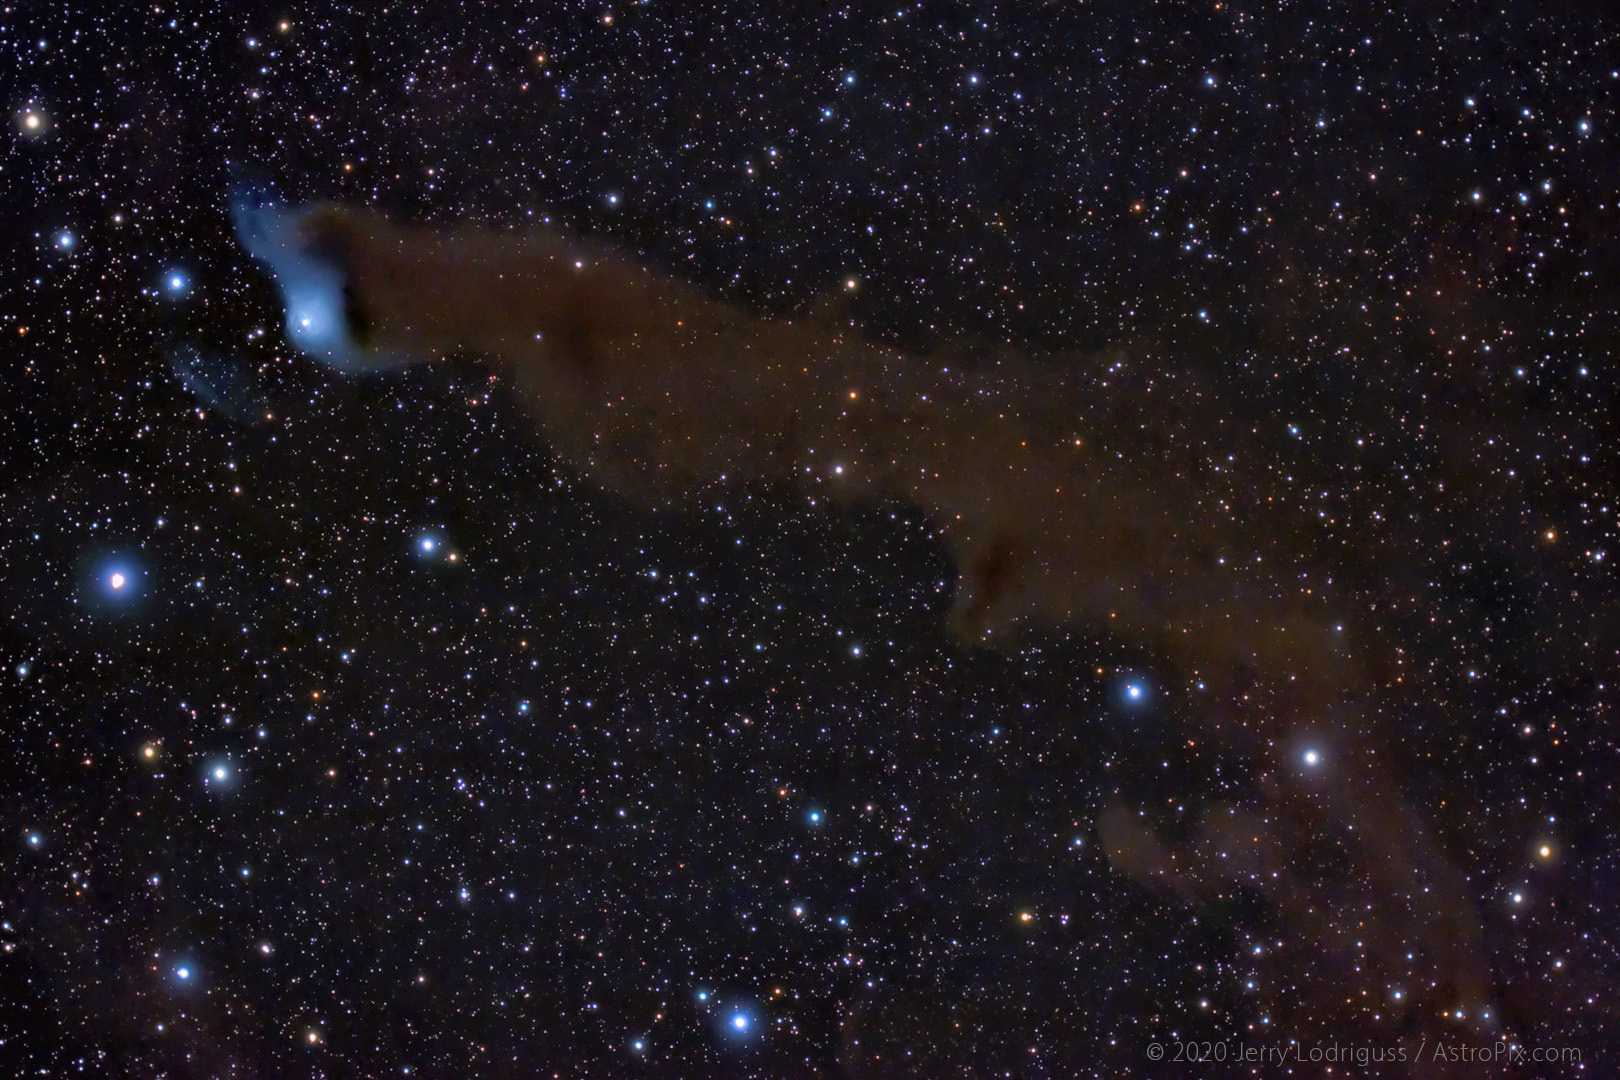 Van den Bergh 152, also known as Cederblad 201, is a blue reflection nebula at top left in the image. The large dark nebula stretching through the frame is Barnard 175, a Bok Globule. This complex, also called Wolf's Cave, is located about 1,400 light years away in the direction of the constellation of Cepheus.<br /><br />Full of very faint dust, this area is part of a large molecular cloud named the Cepheus Flare by Edwin Hubble. The opaque dust blocks most of the starlight behind it, but blue light from a young star is scattered and reflected off some of the particles to illuminate the reflection part of the nebula. Some of the faint dust may be glowing in a dim red color from luminescence, forming an Extended Red Emission nebula (ERE).